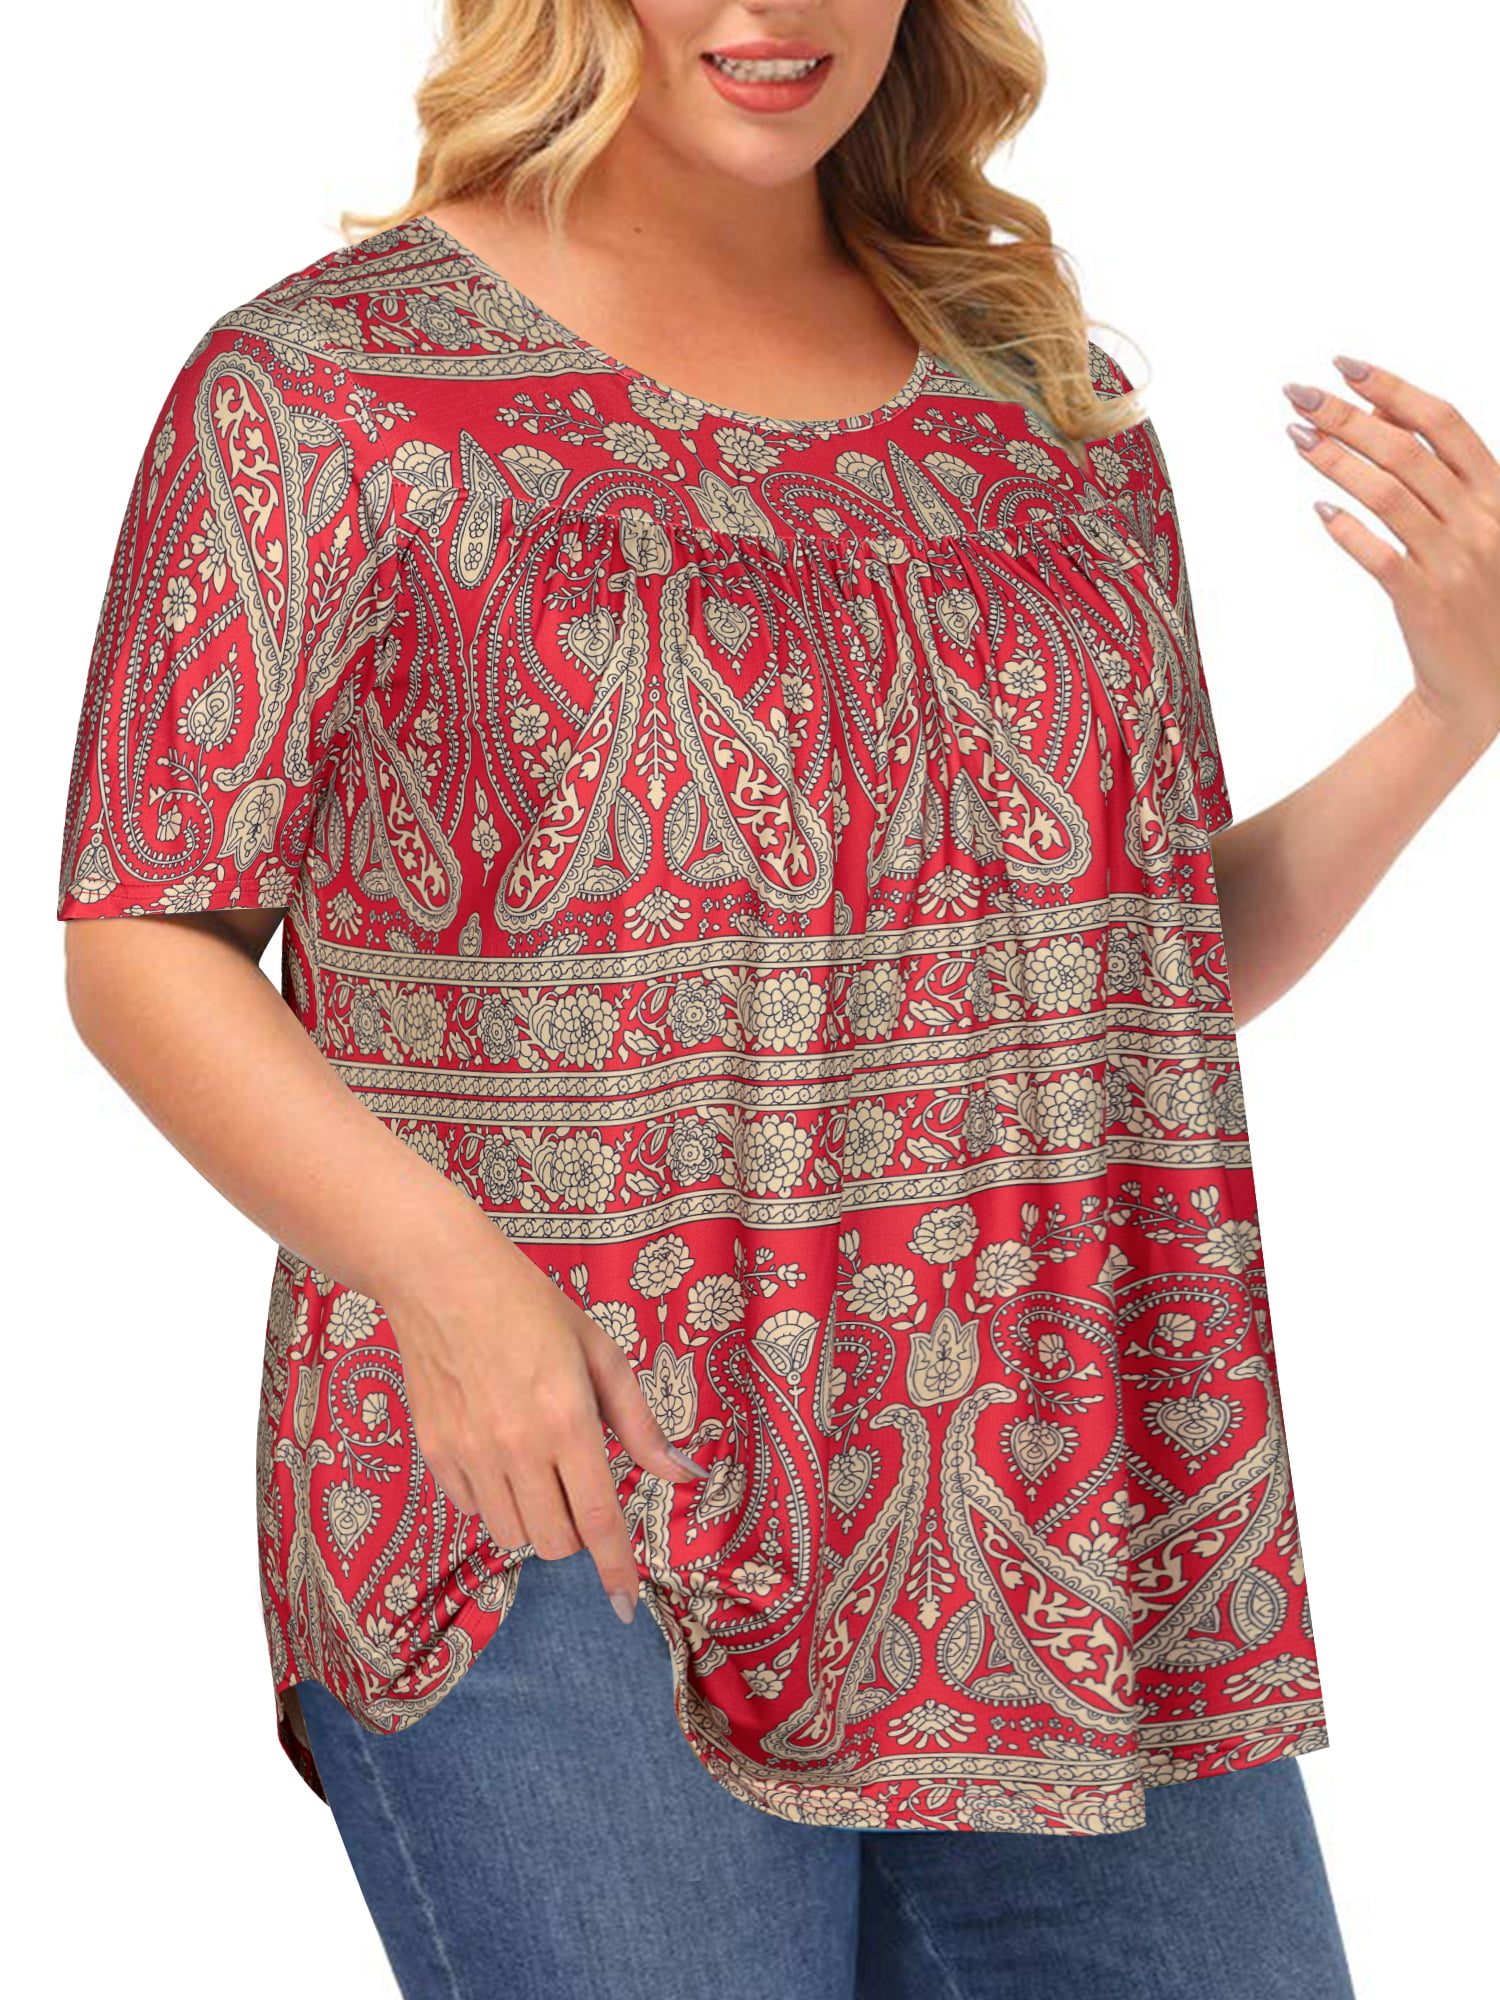 Chama Short Sleeve T Shirt for Women Plus Size Flowy Tunic Tops Casual  Paisley Blouses 